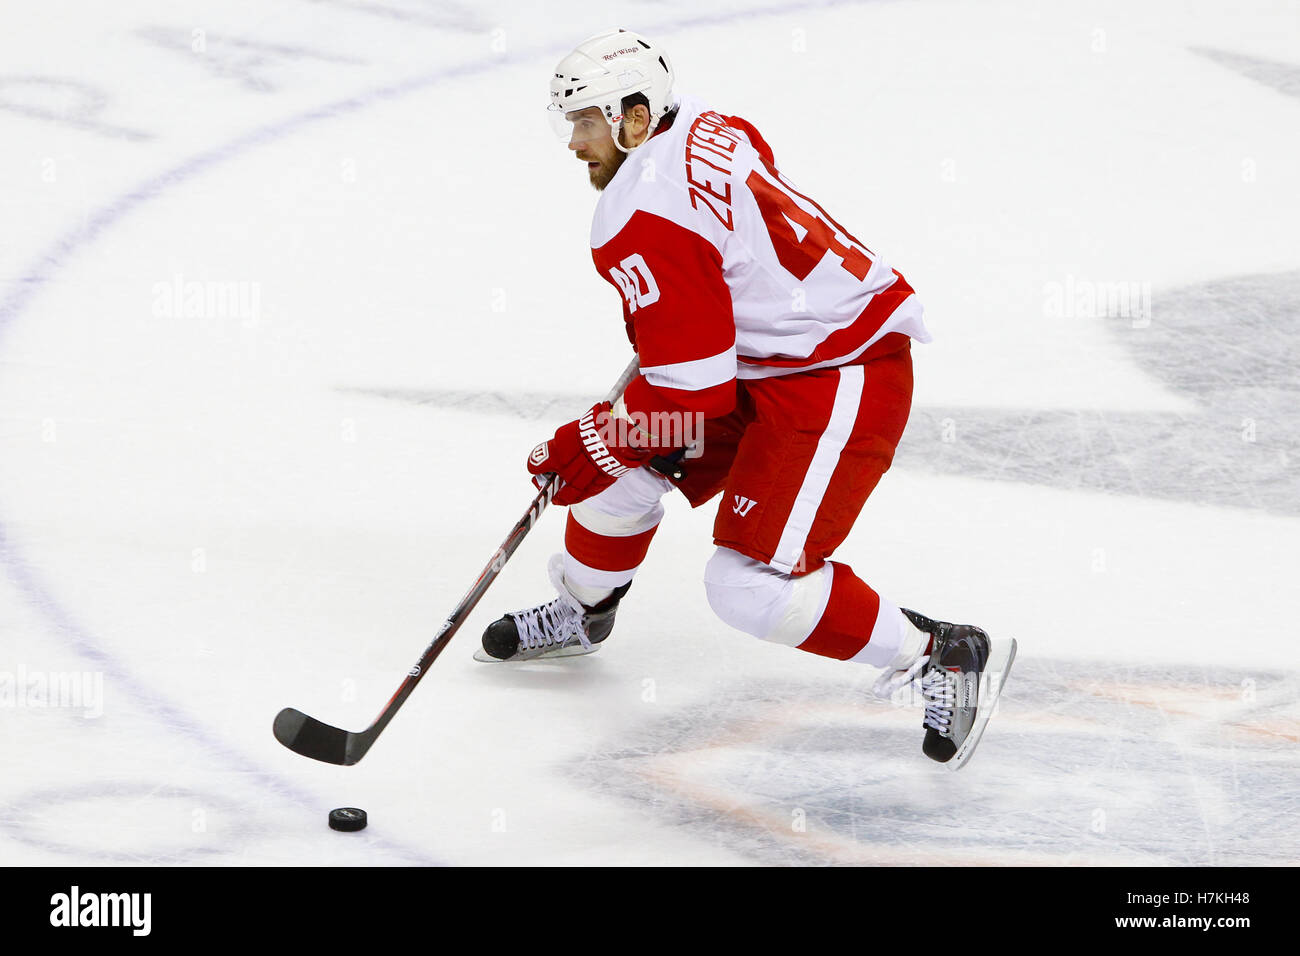 Zetterberg to drop puck for Red Wings home opener